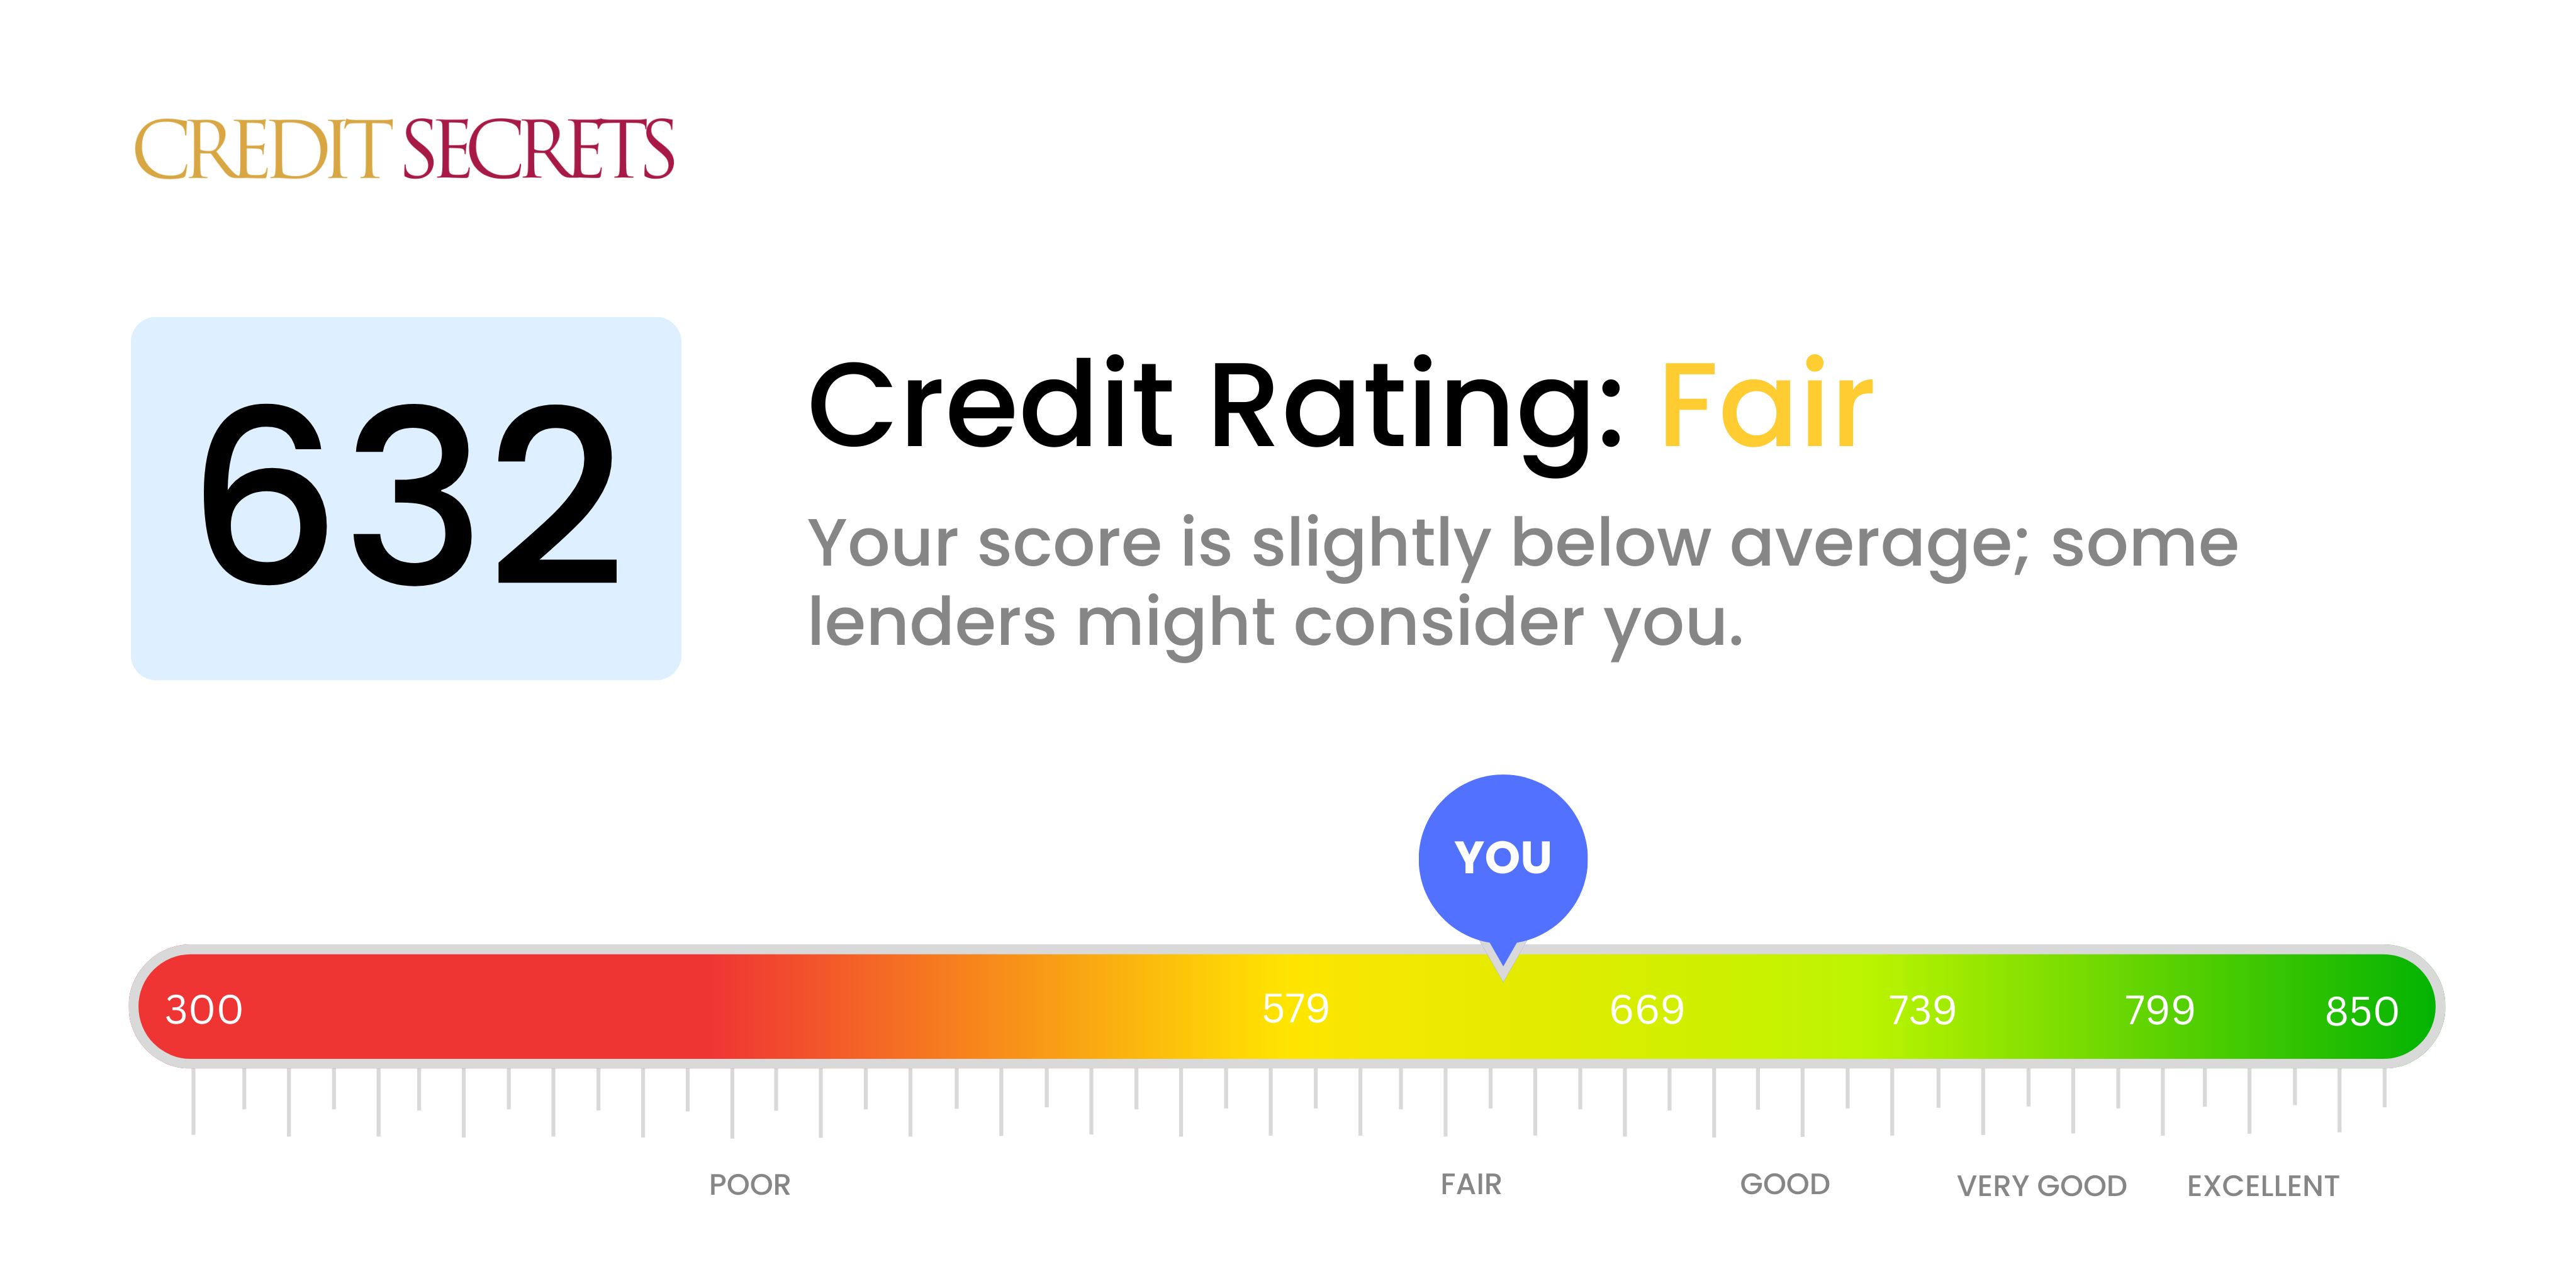 Is 632 a good credit score?